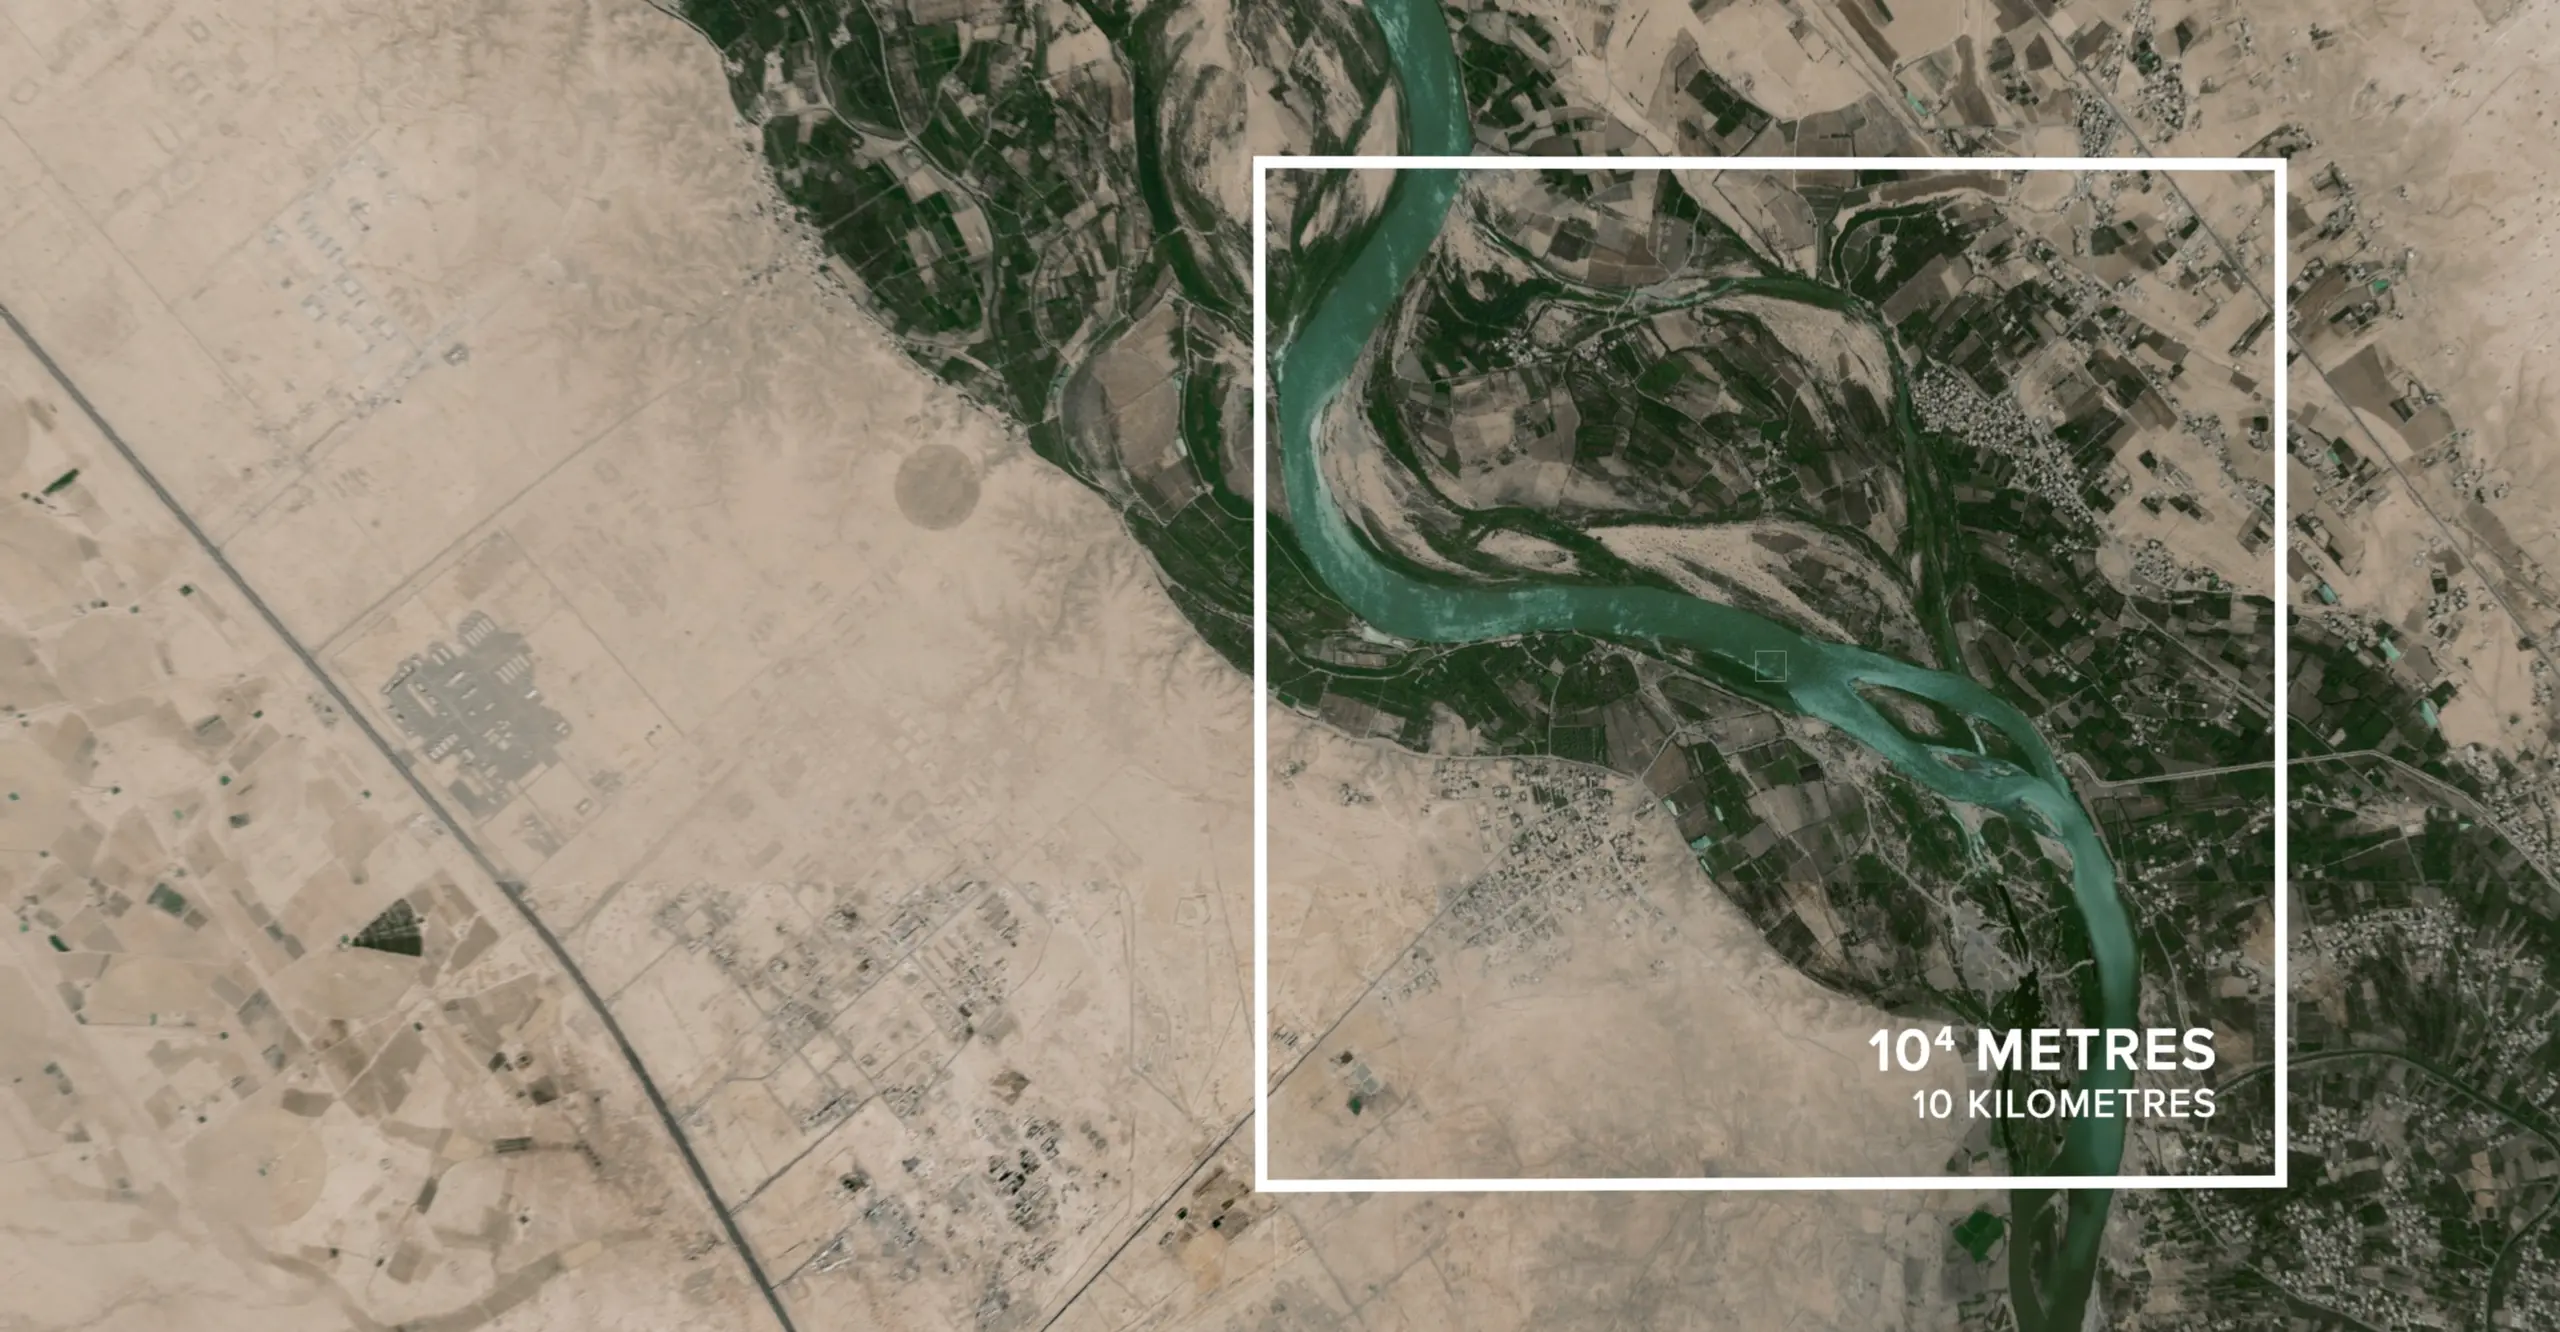 An aerial photograph of a greenish river running through an arid environment, with a superimposed white square on the centre, with text inside reading: 10^4 metres, 10 Kilometres